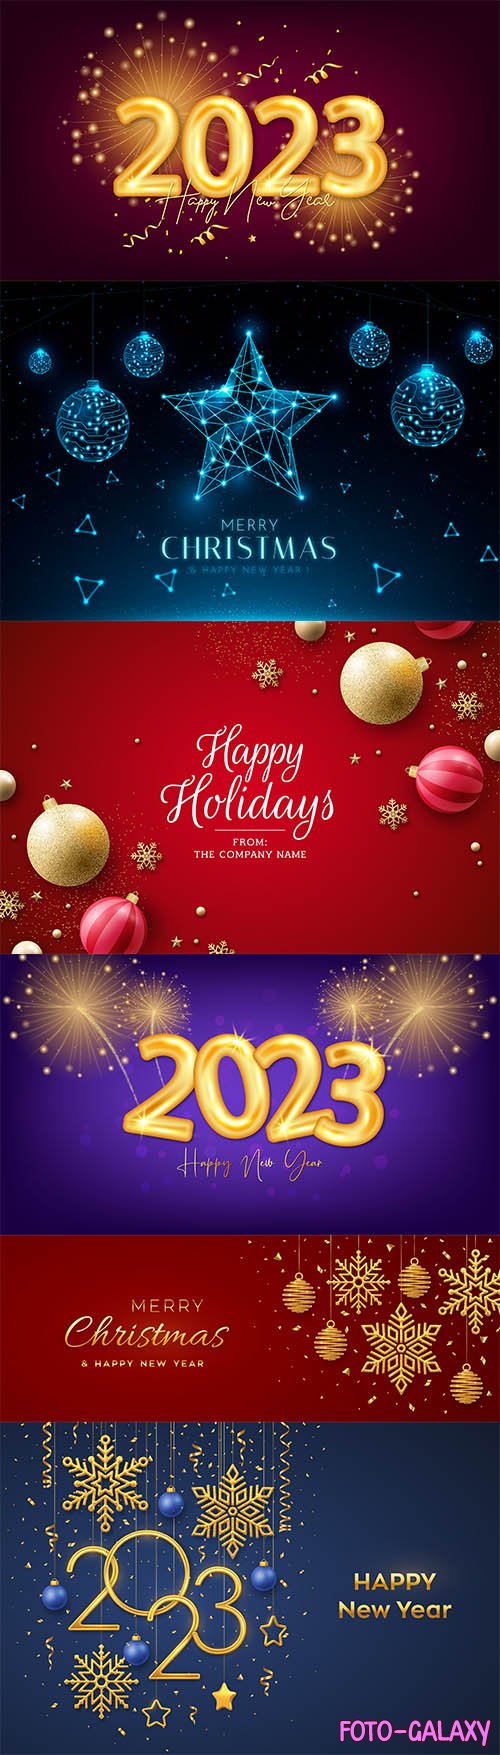 Christmas vector background with realistic decoration